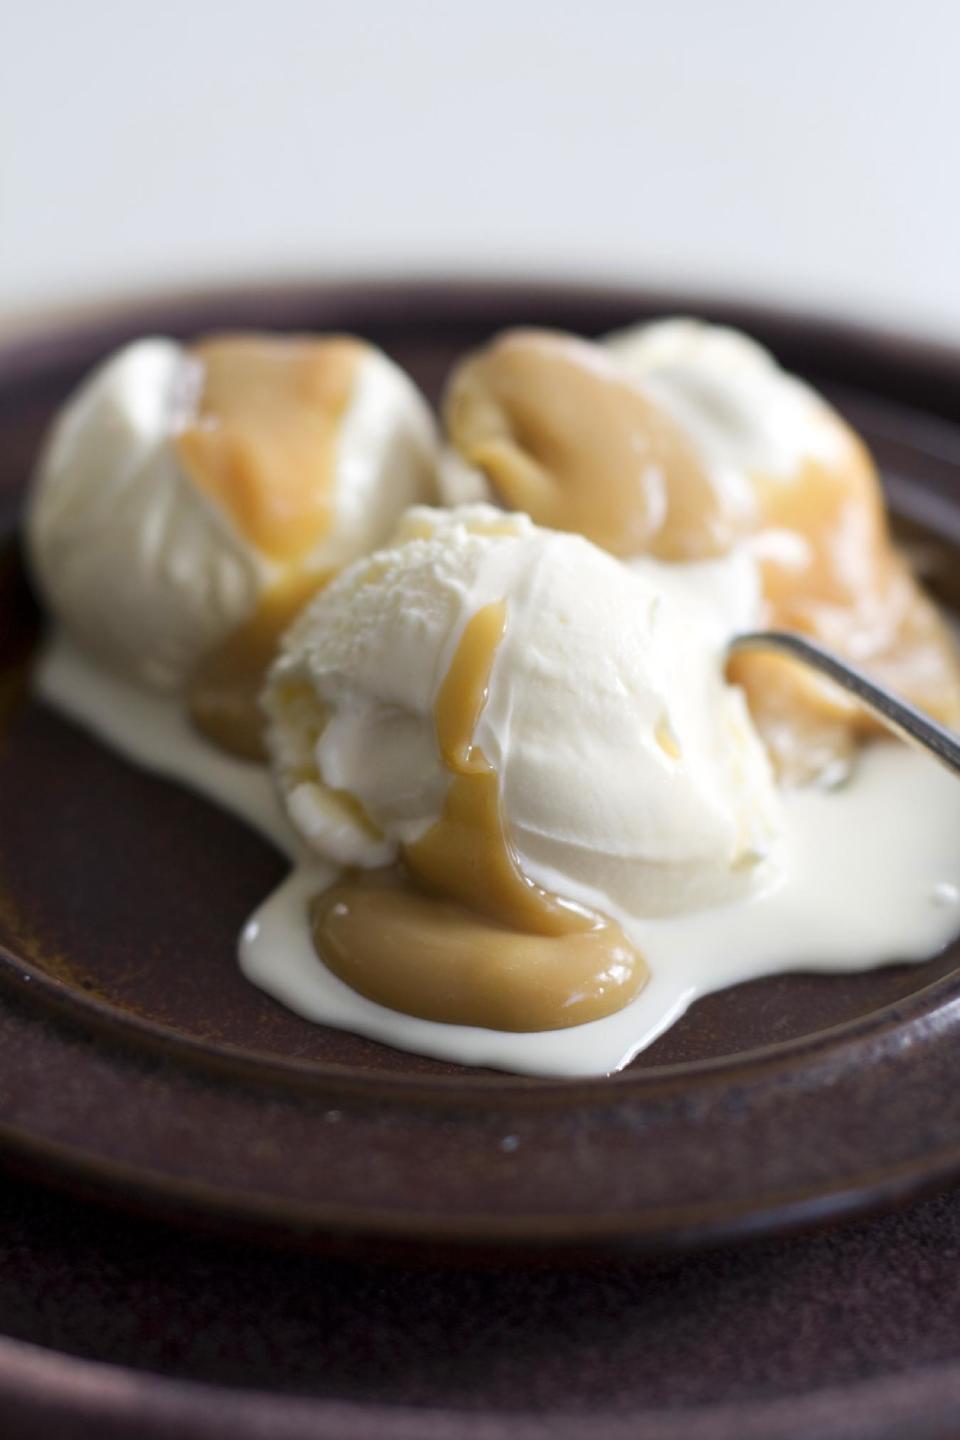 This April 1, 2013 photo taken in Concord, N.H. shows ice cream topped with a dulce de leche sauce. (AP Photo/Matthew Mead)